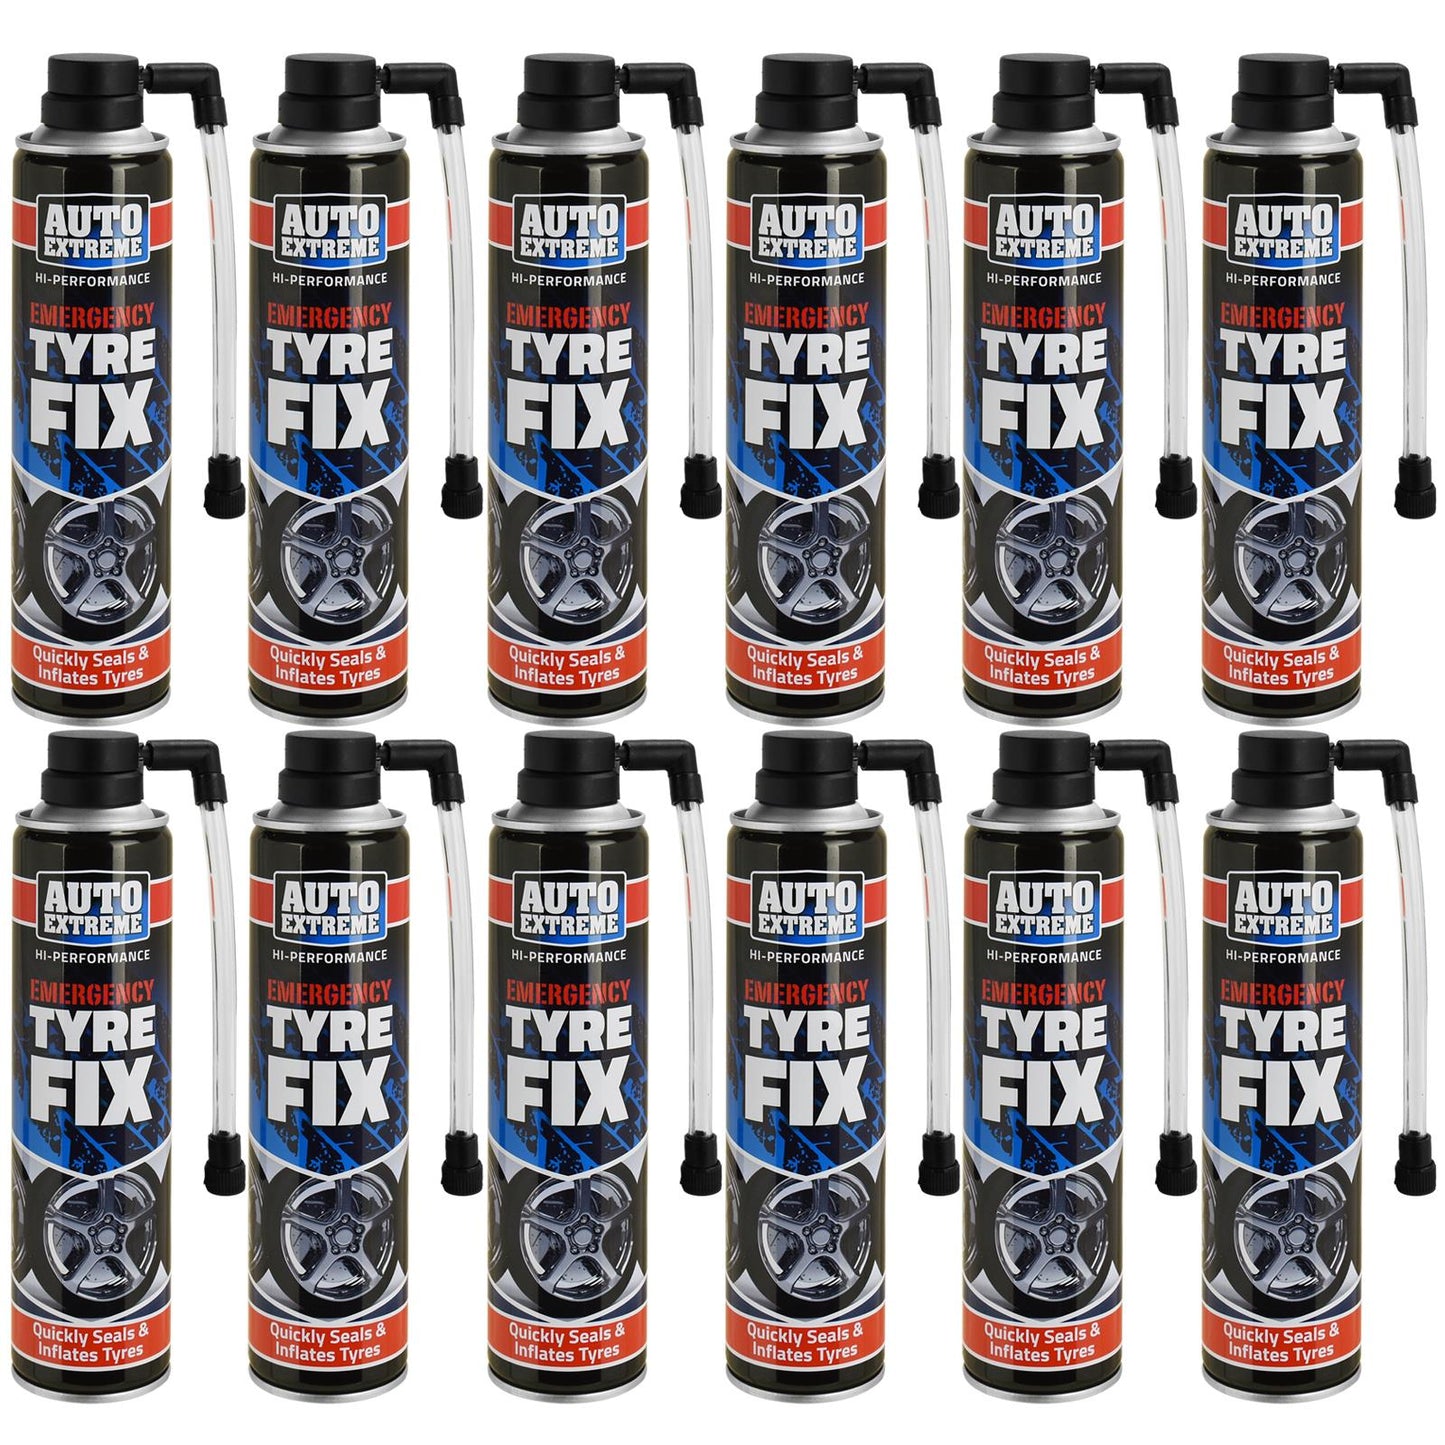 Be Ready for Car Emergencies with a Quick Fix Repair Kit